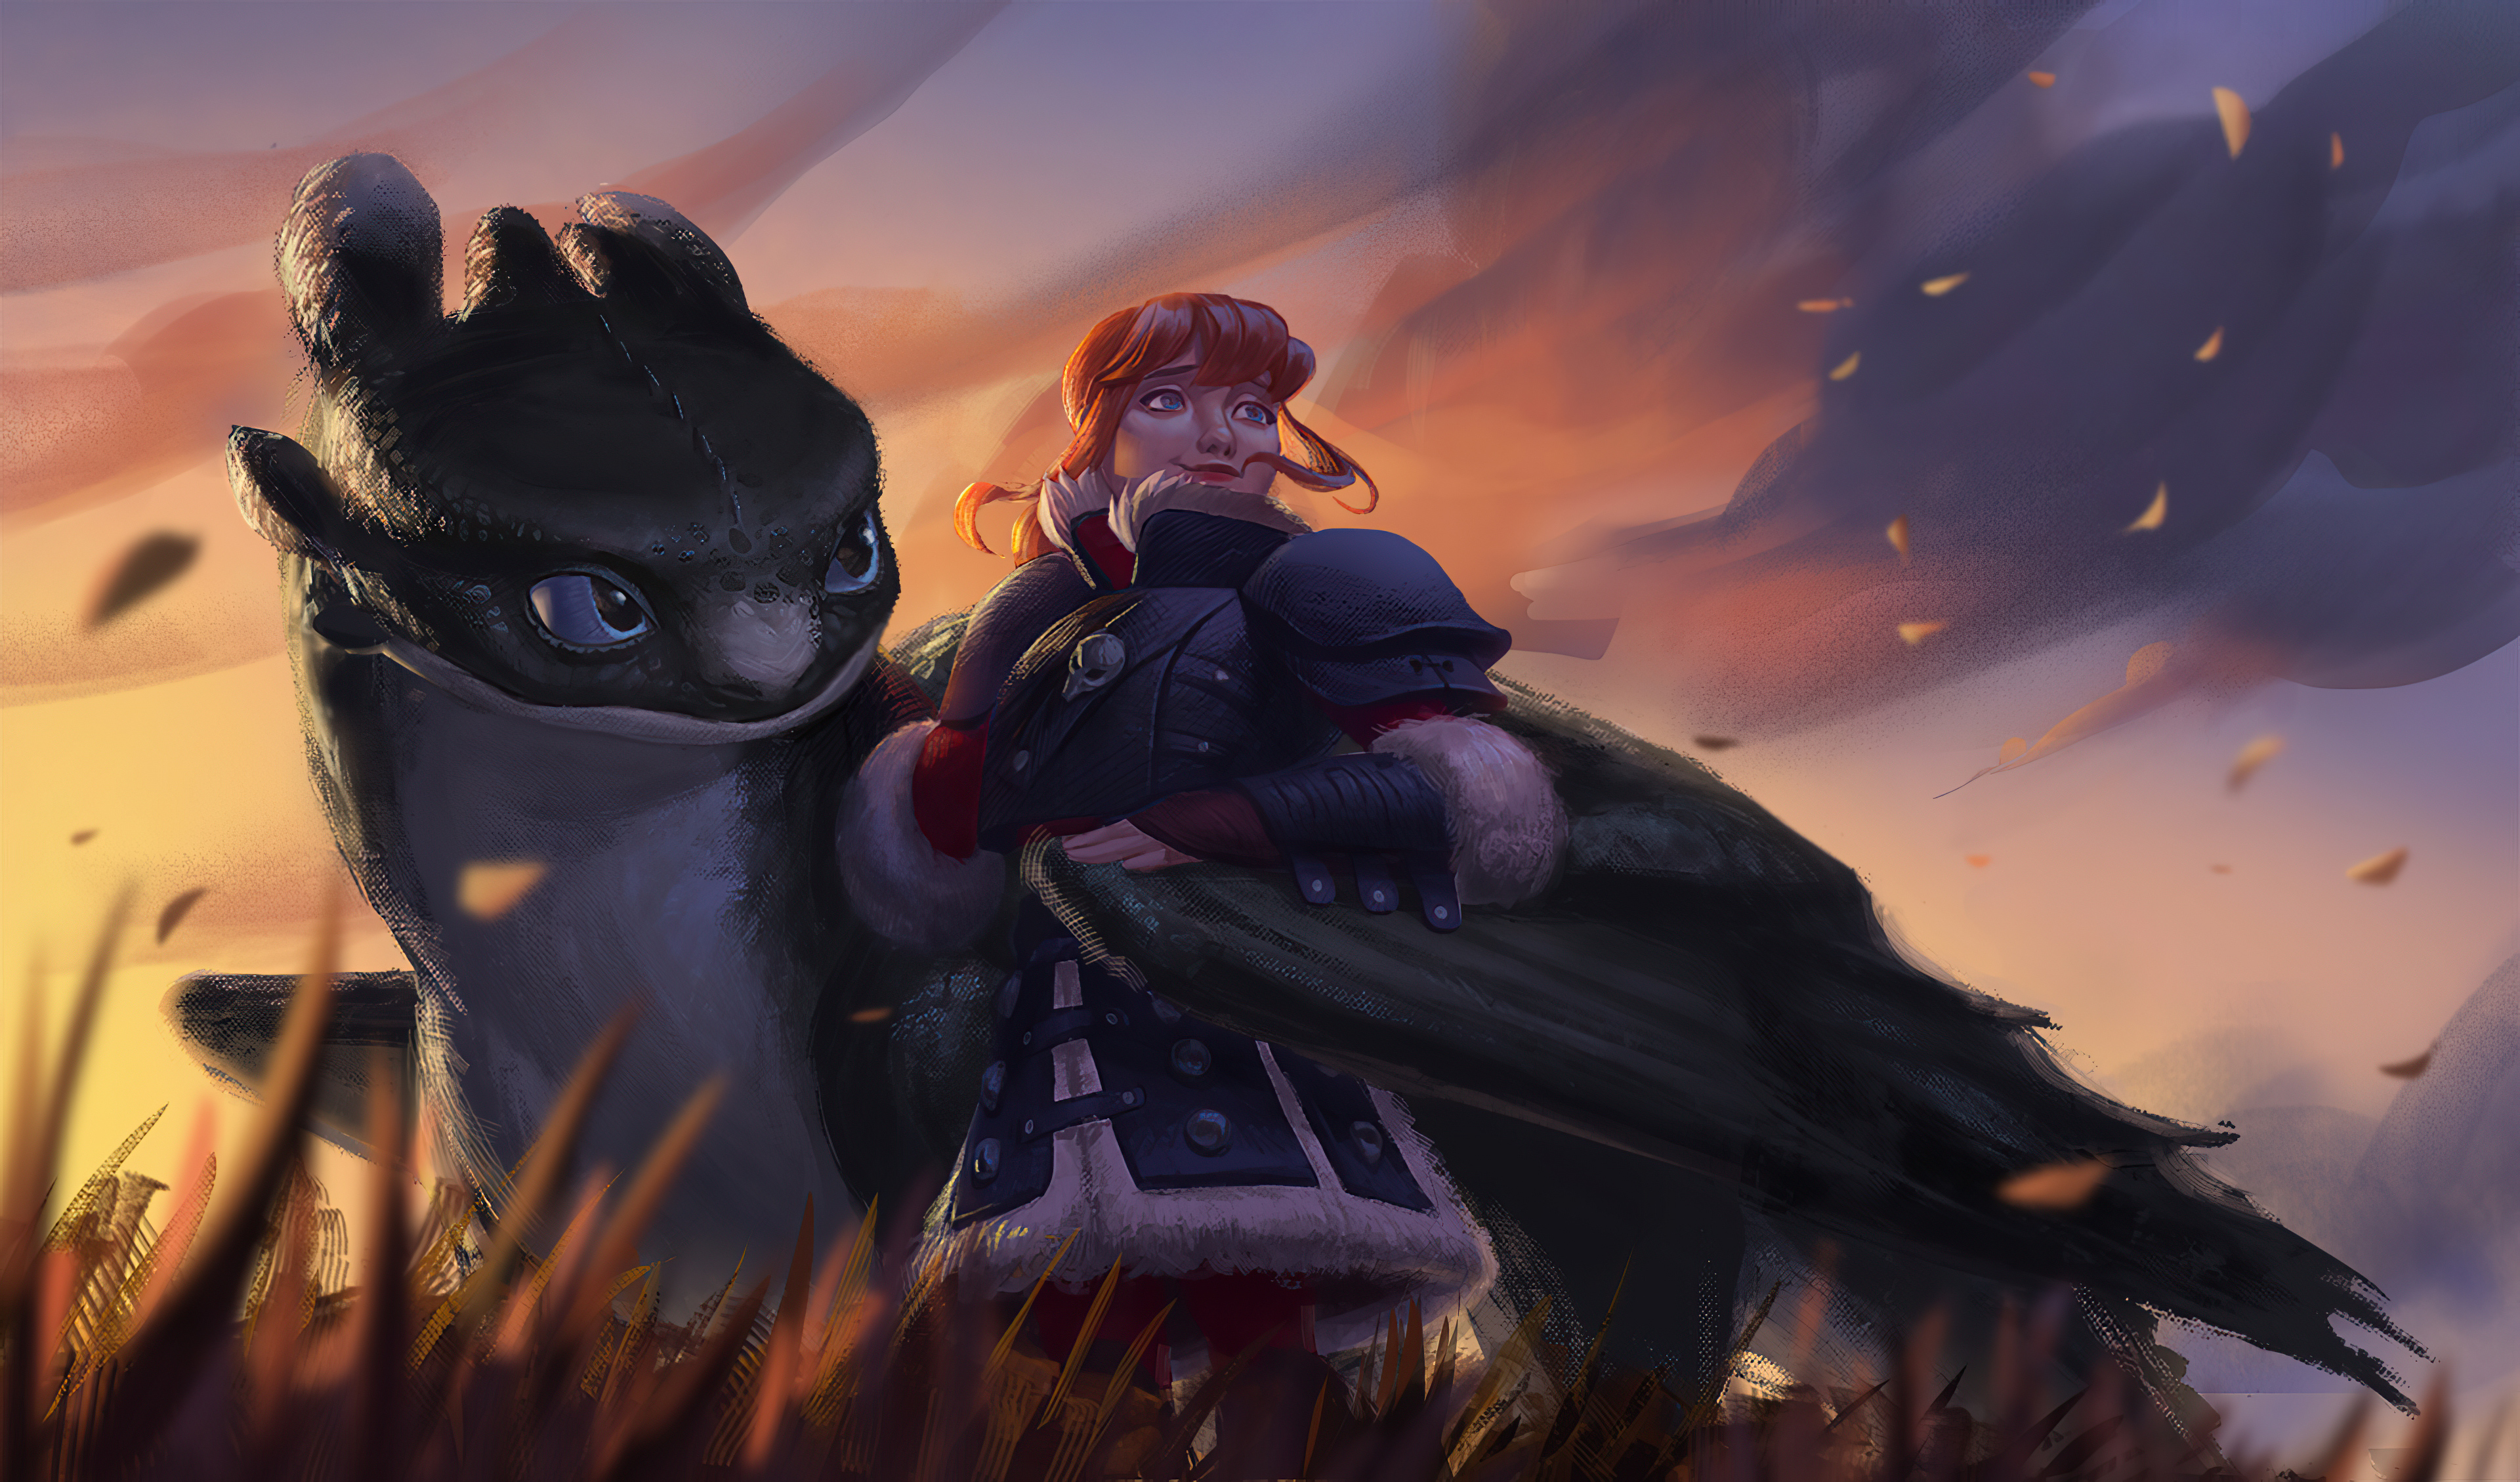 How To Train Your Dragon 4k Ultra HD Wallpaper by Khanh Pham